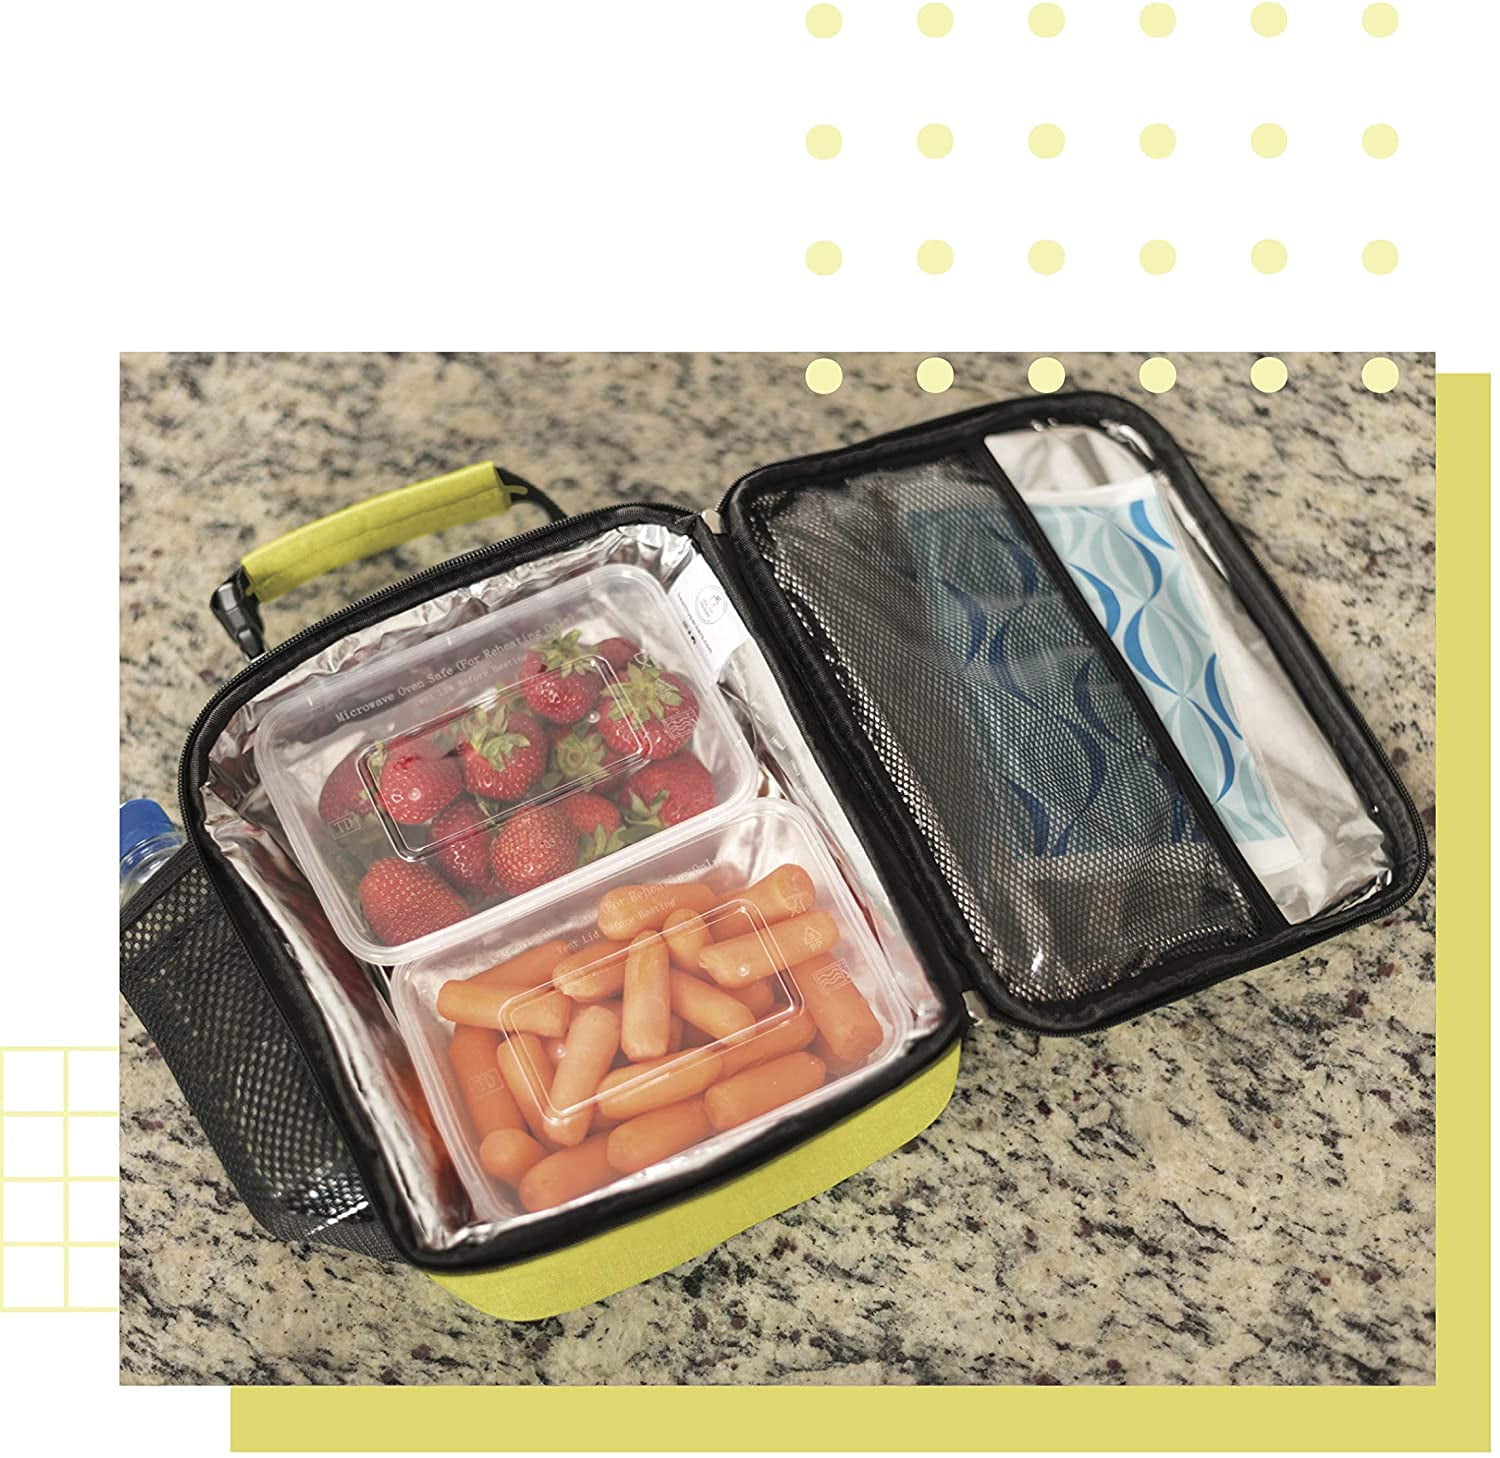 Healthy Packers Insulated Meal Prep Bag with Food Portion Control Cont